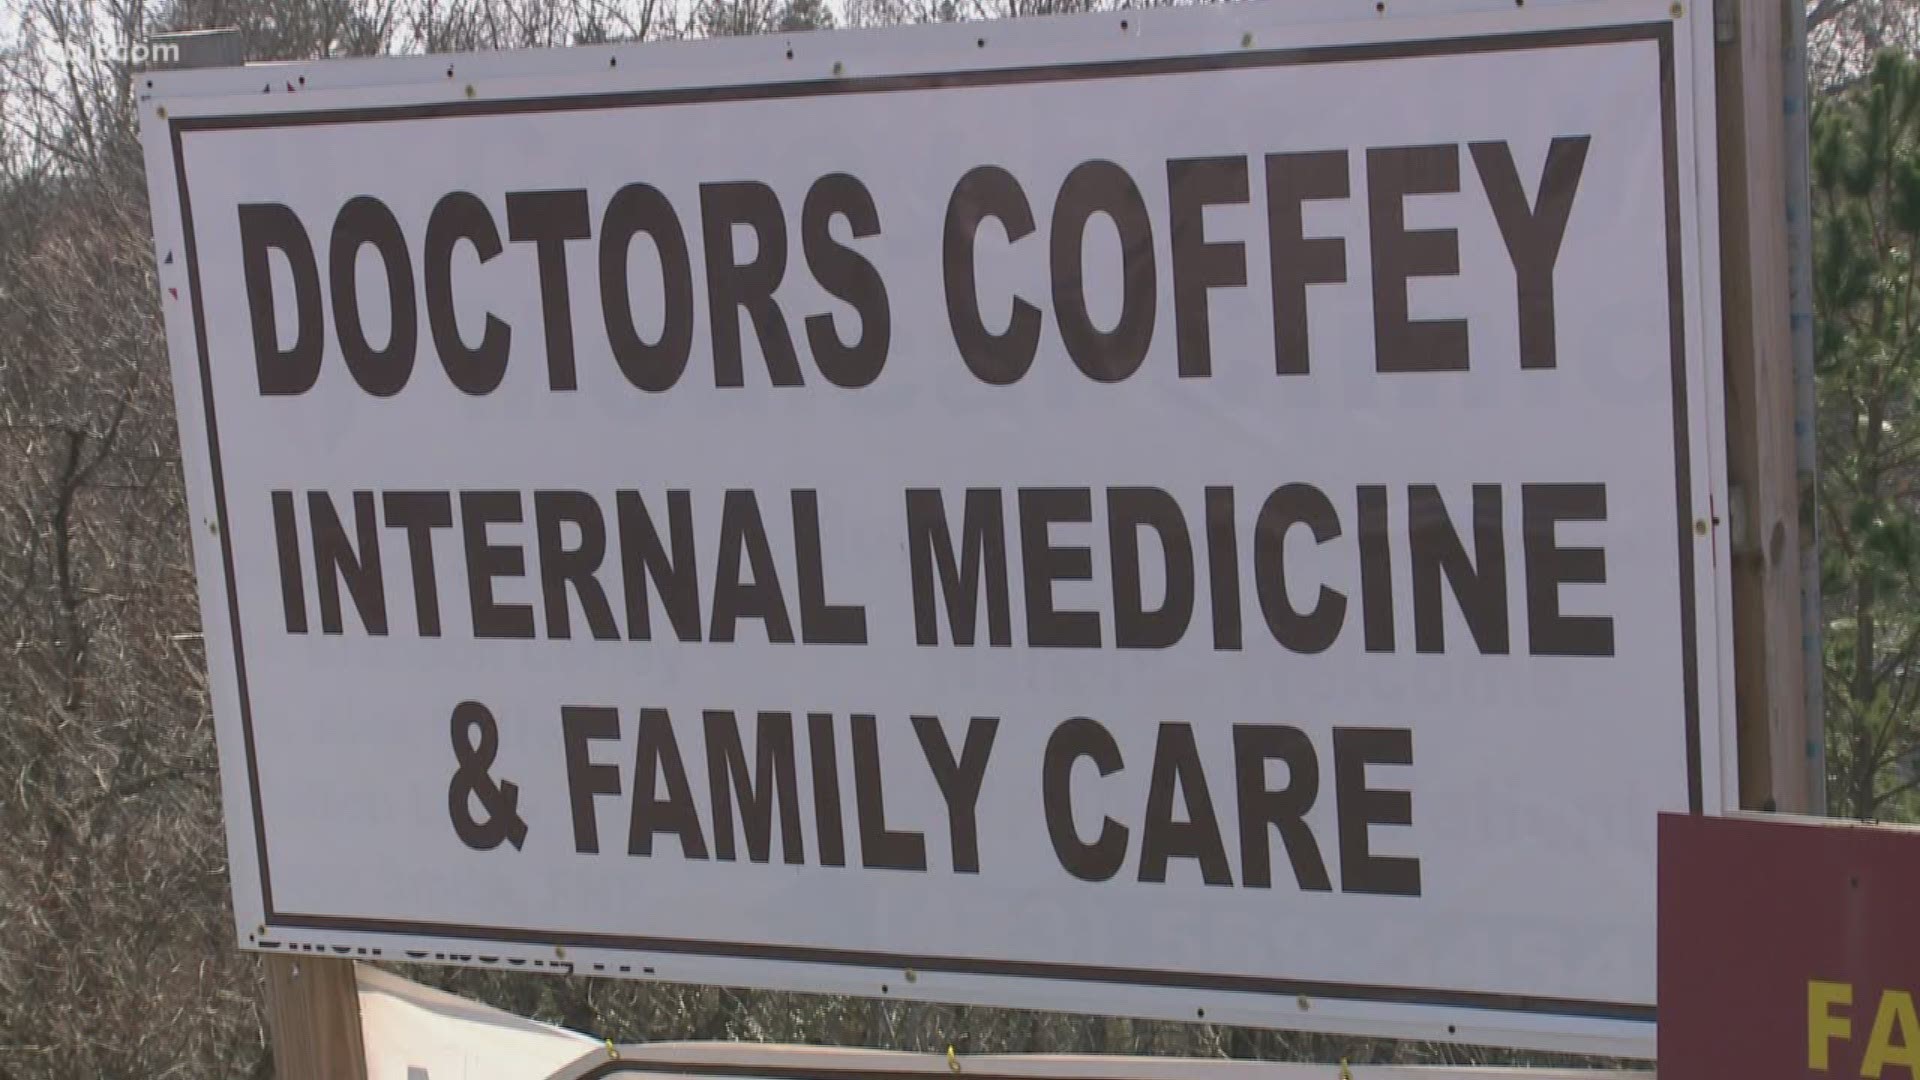 For three southeastern KY counties, the DEA says Oneida doctor Bruce Coffey was primary source of pills for drug traffickers.